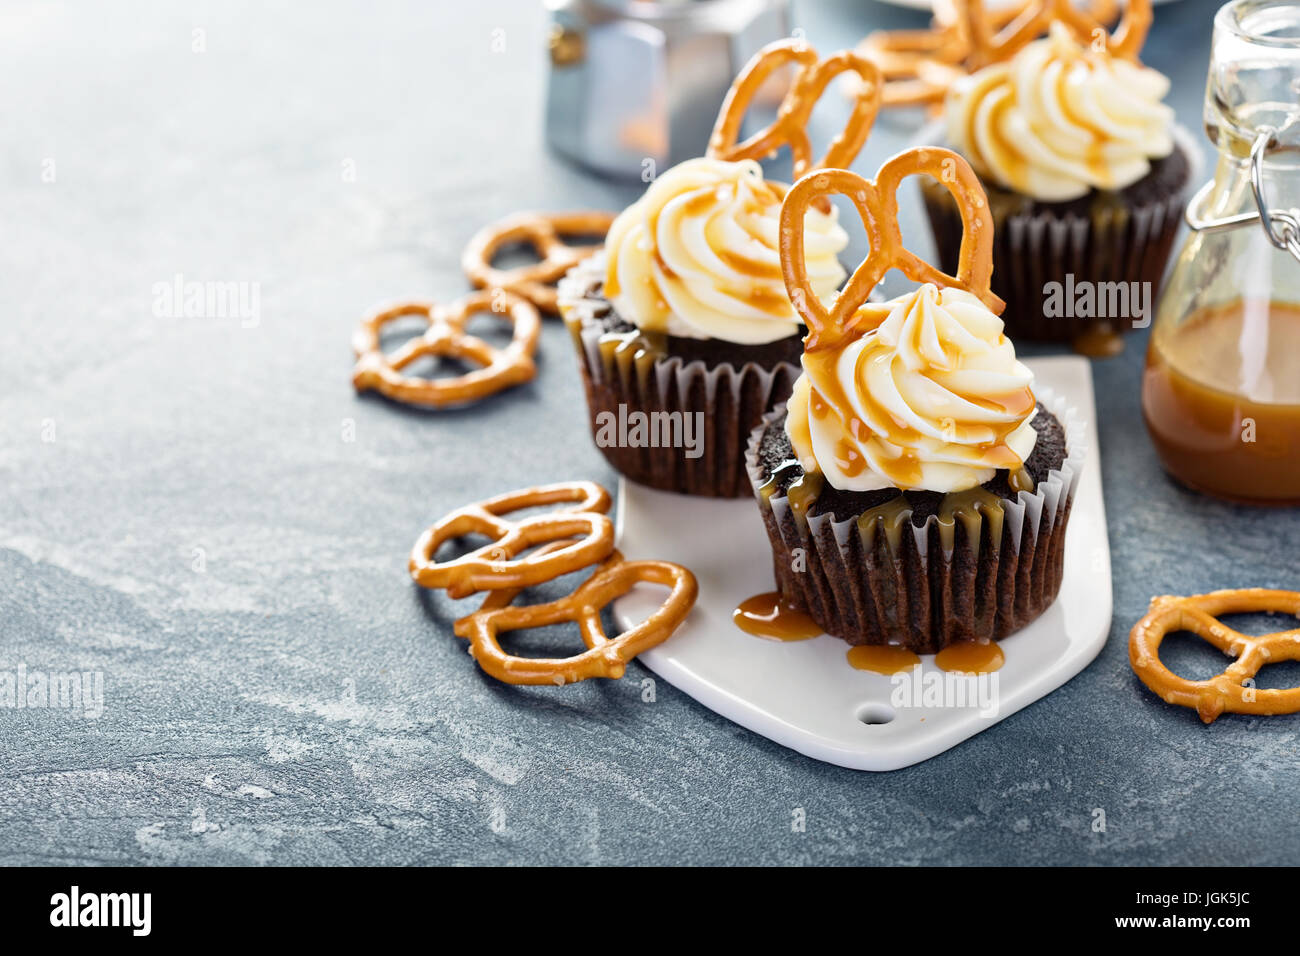 Salted caramel cupcakes with pretzels Stock Photo